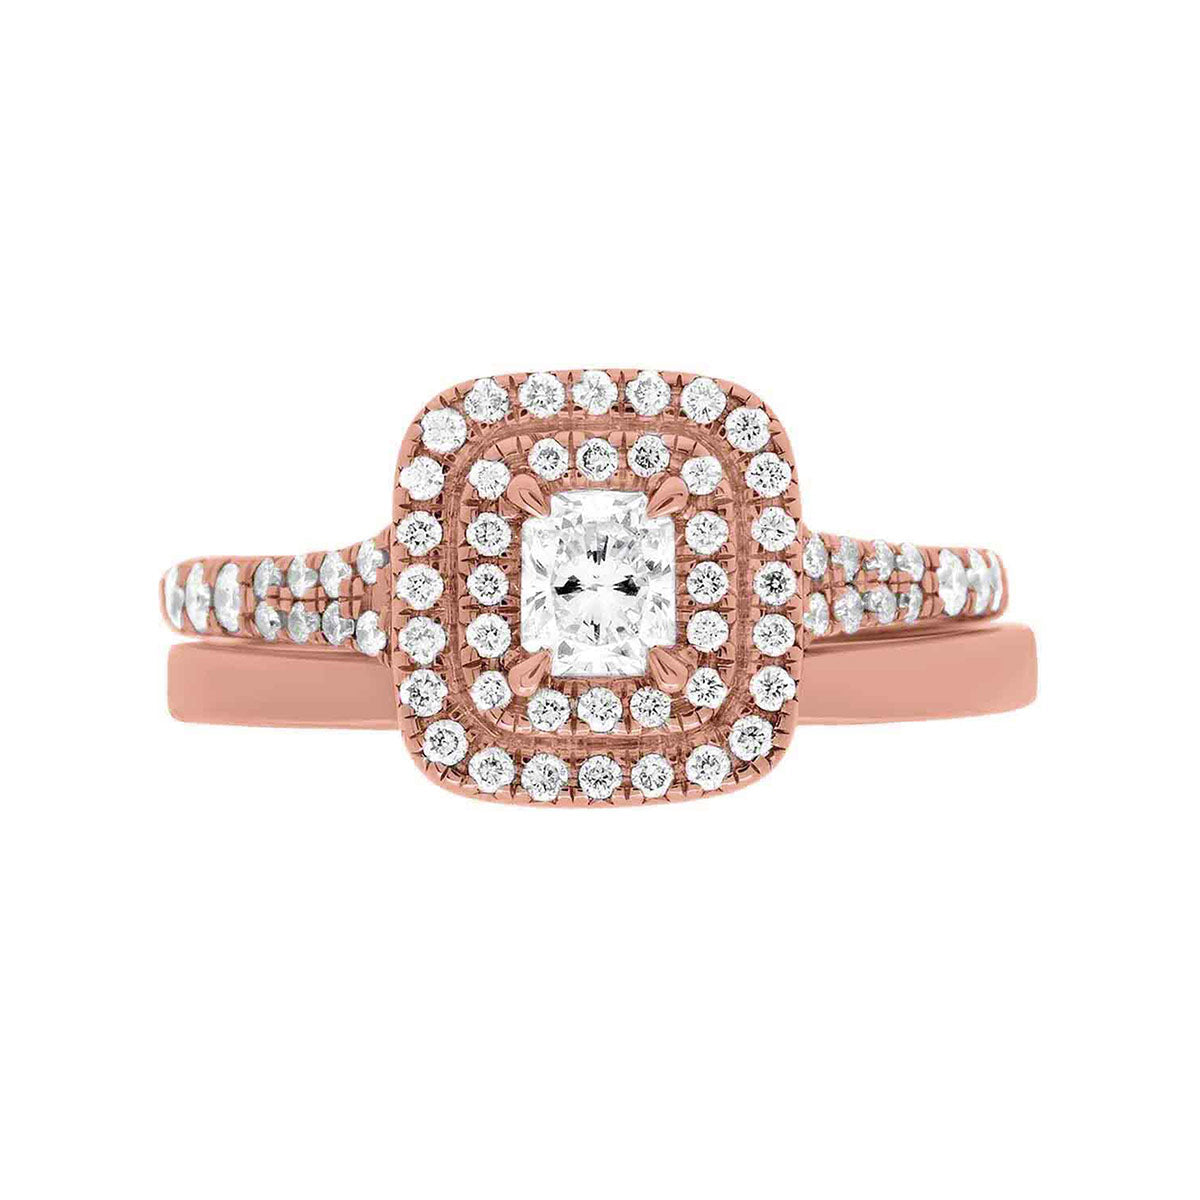 Double Halo Cushion Cut Diamond Ring in rose gold pictured with a matching wedding ring